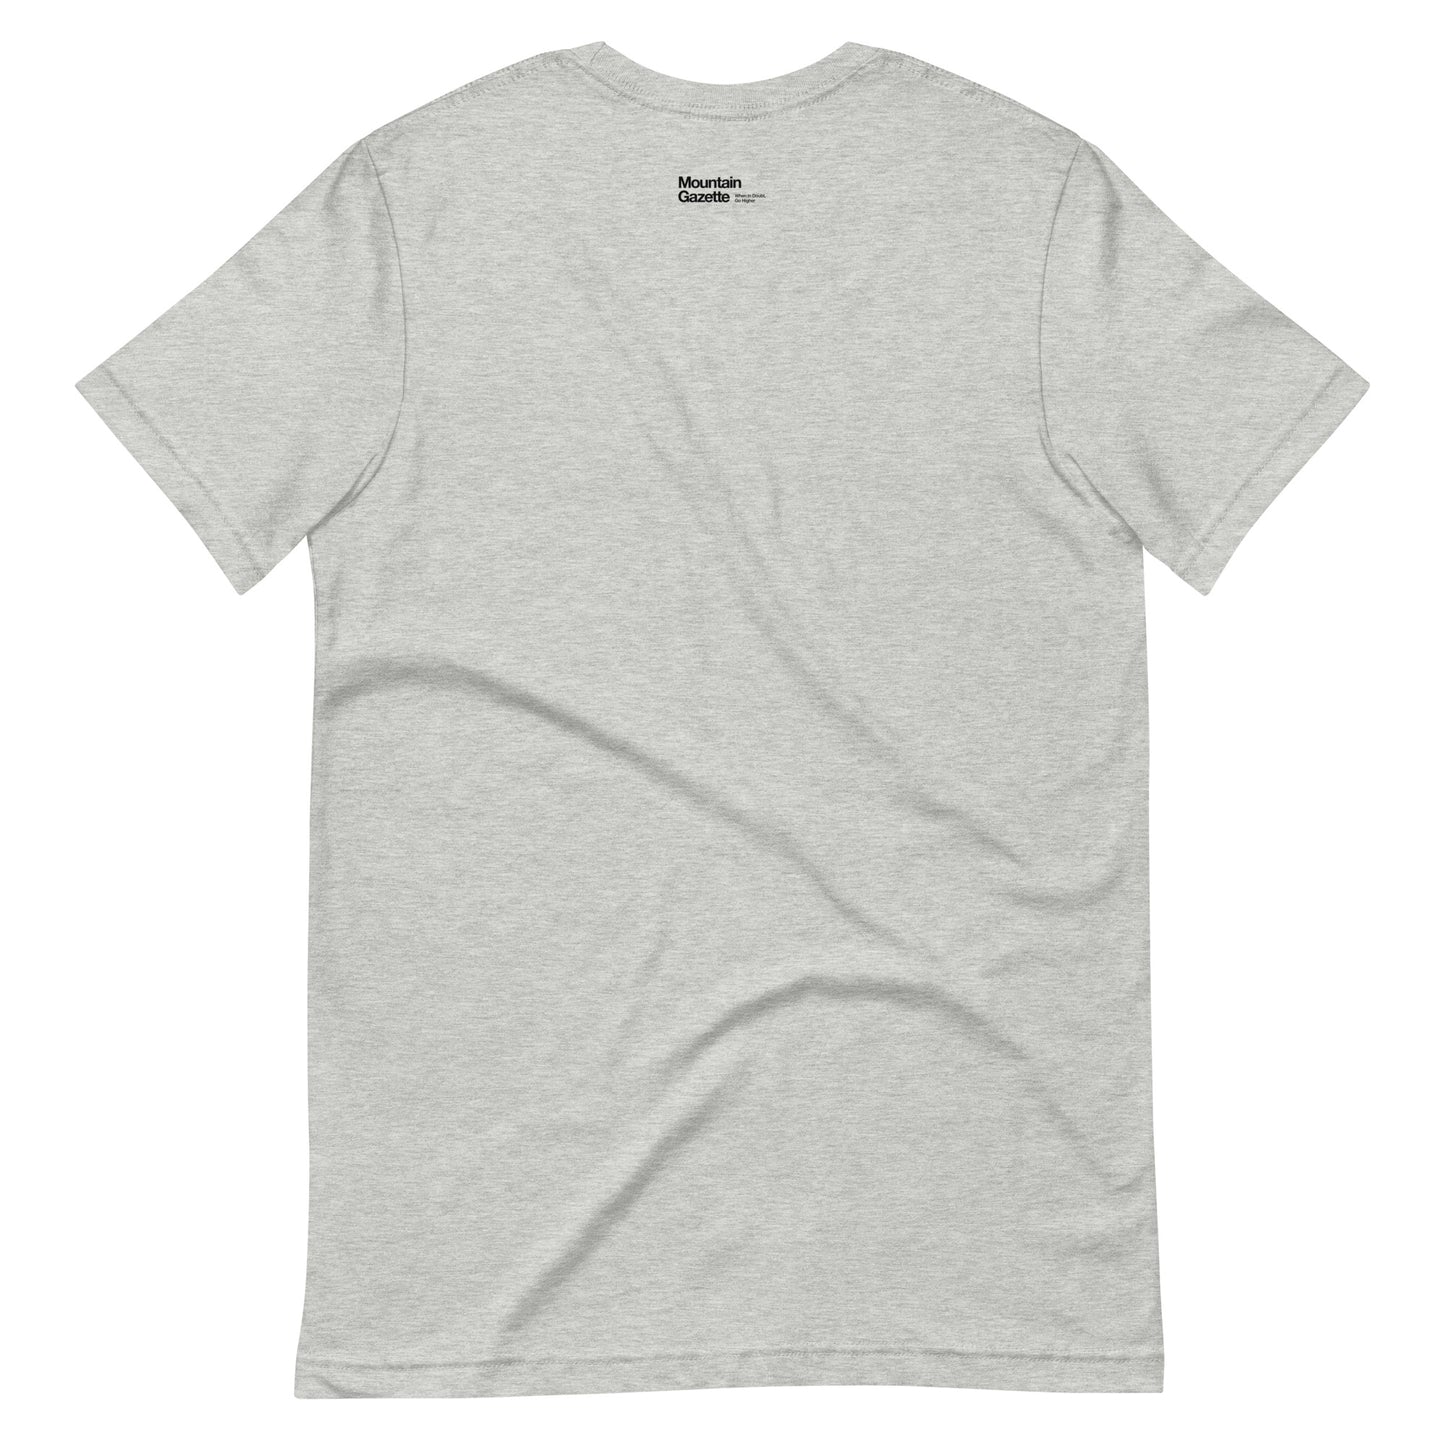 Back of Gray Unisex Short-Sleeve Cotton T-Shirt with text I Love Small Ski Areas